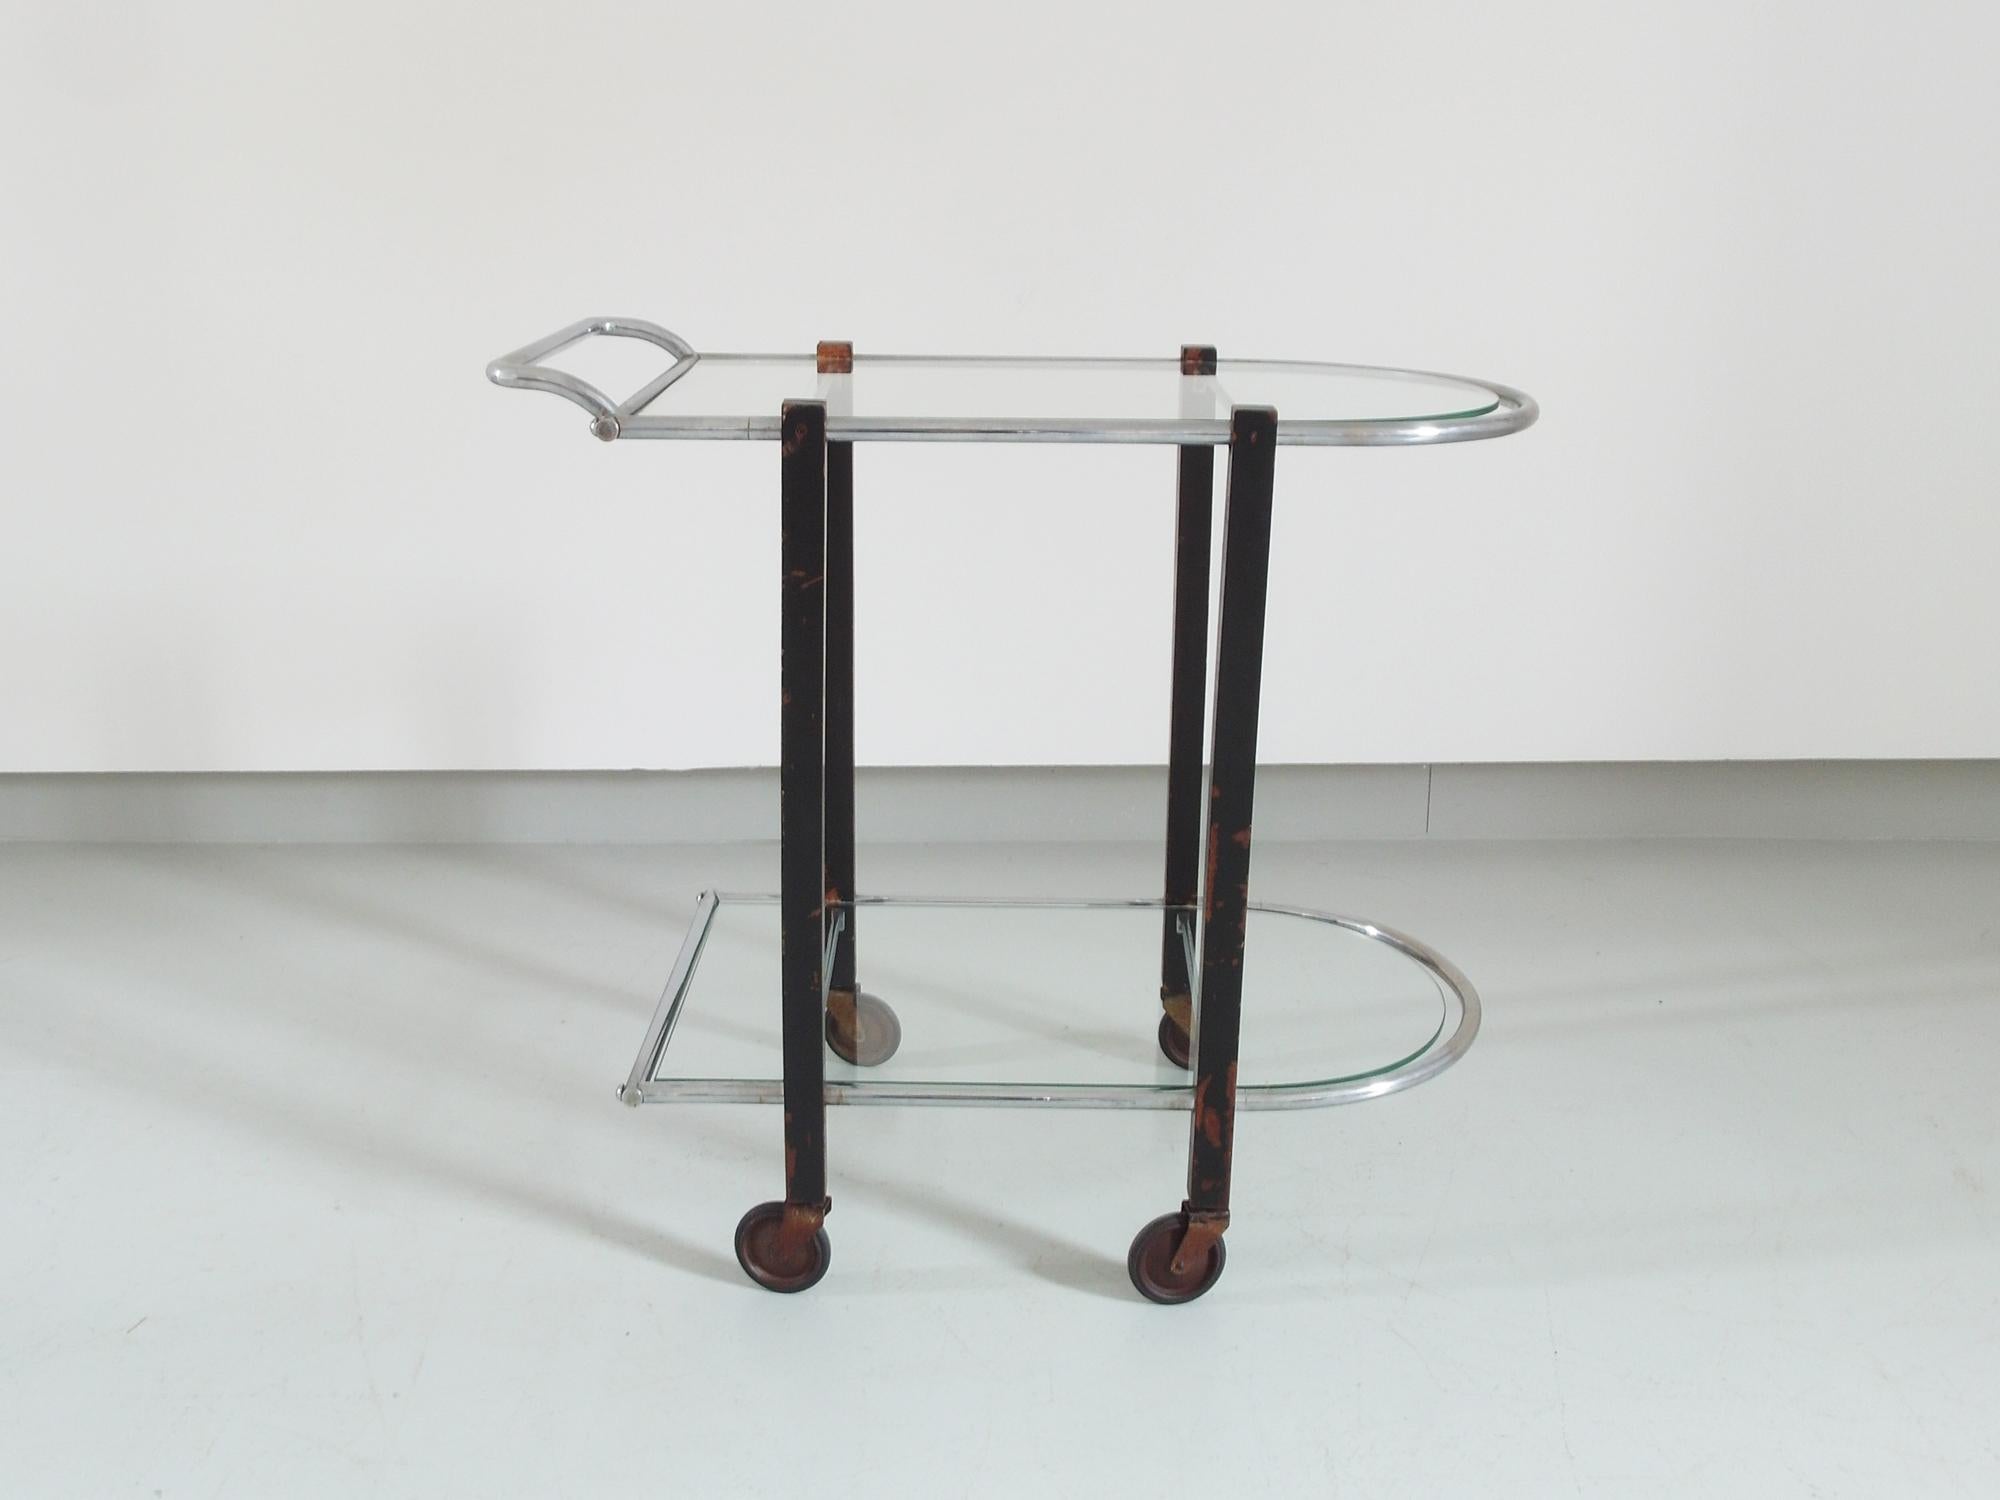 Art Deco modernist Bauhaus bar cart, or serving table or trolley, designed and executed in the 1920s-1930s in the Netherlands. This modernist cart is made of chromed metal, ebonite wood and glass. We kept it in full original condition with